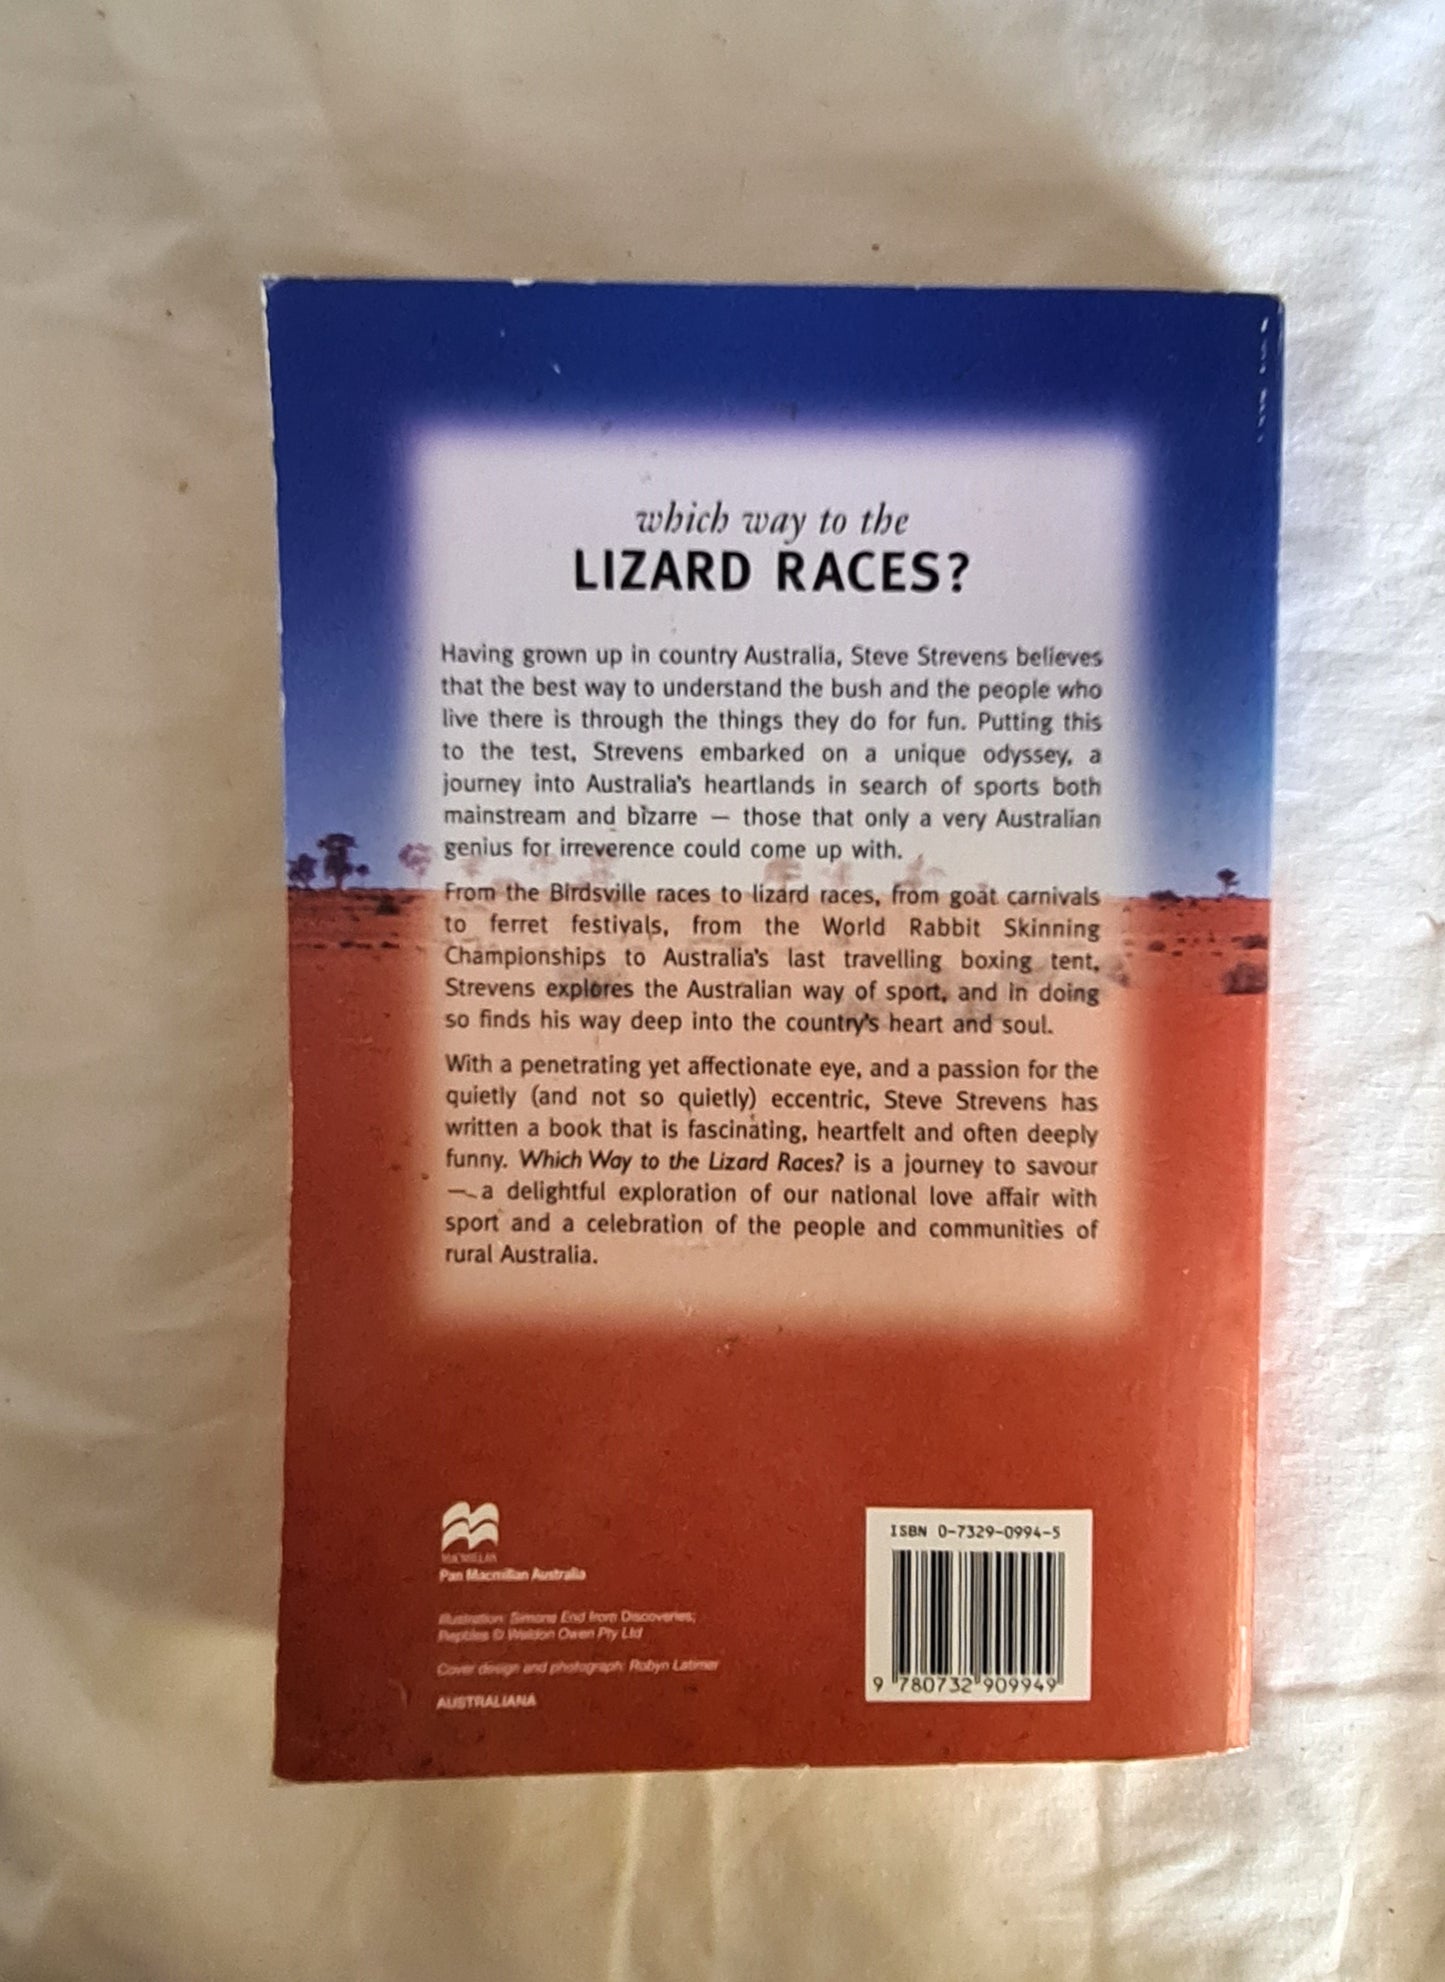 Which Way to the Lizard Races? by Steve Strevens